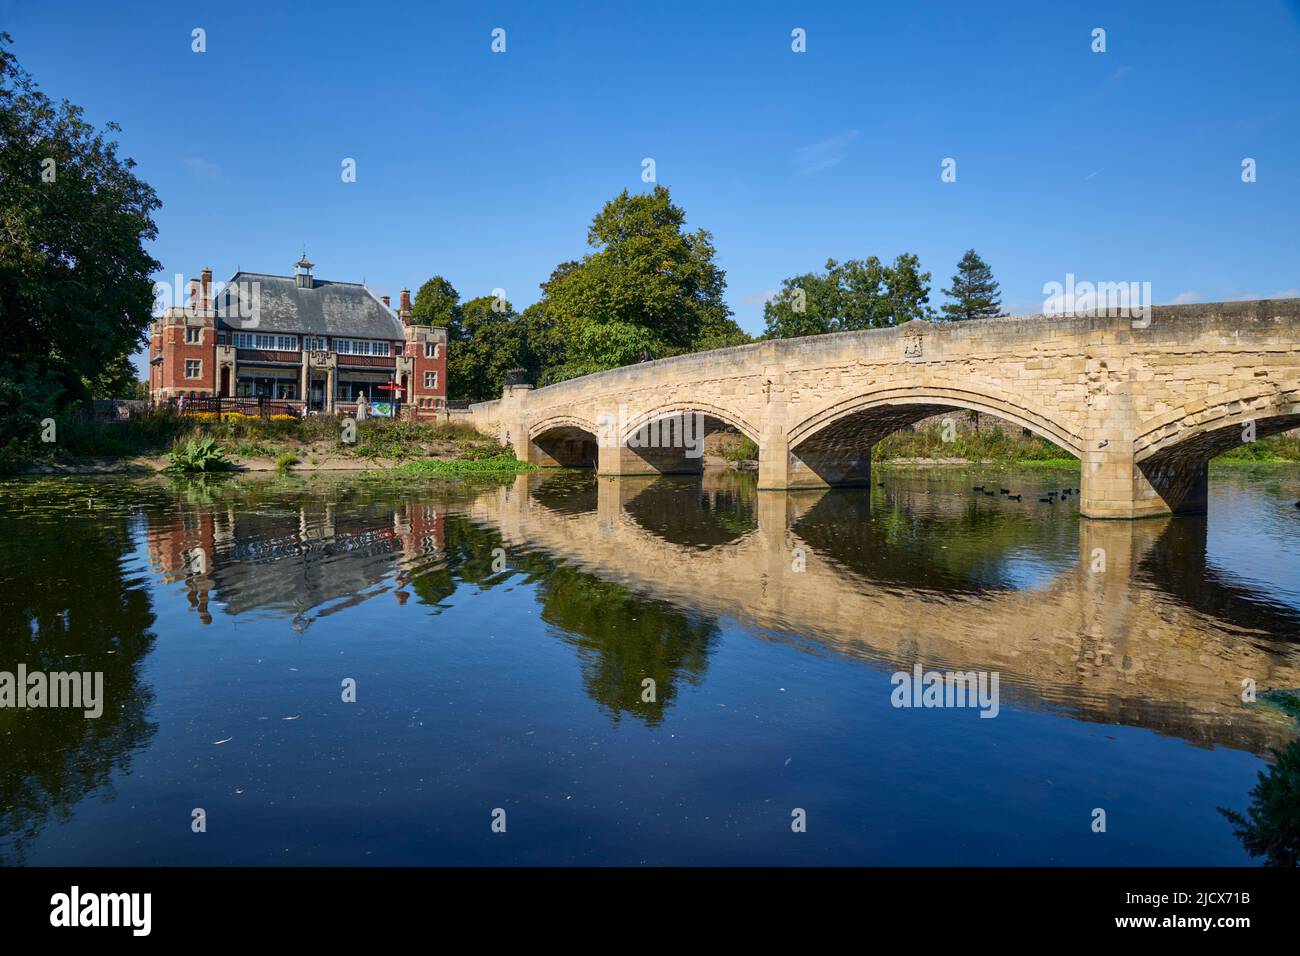 Abbey Park Bridge over River Soar, Leicester, Leicestershire, England, United Kingdom, Europe Stock Photo